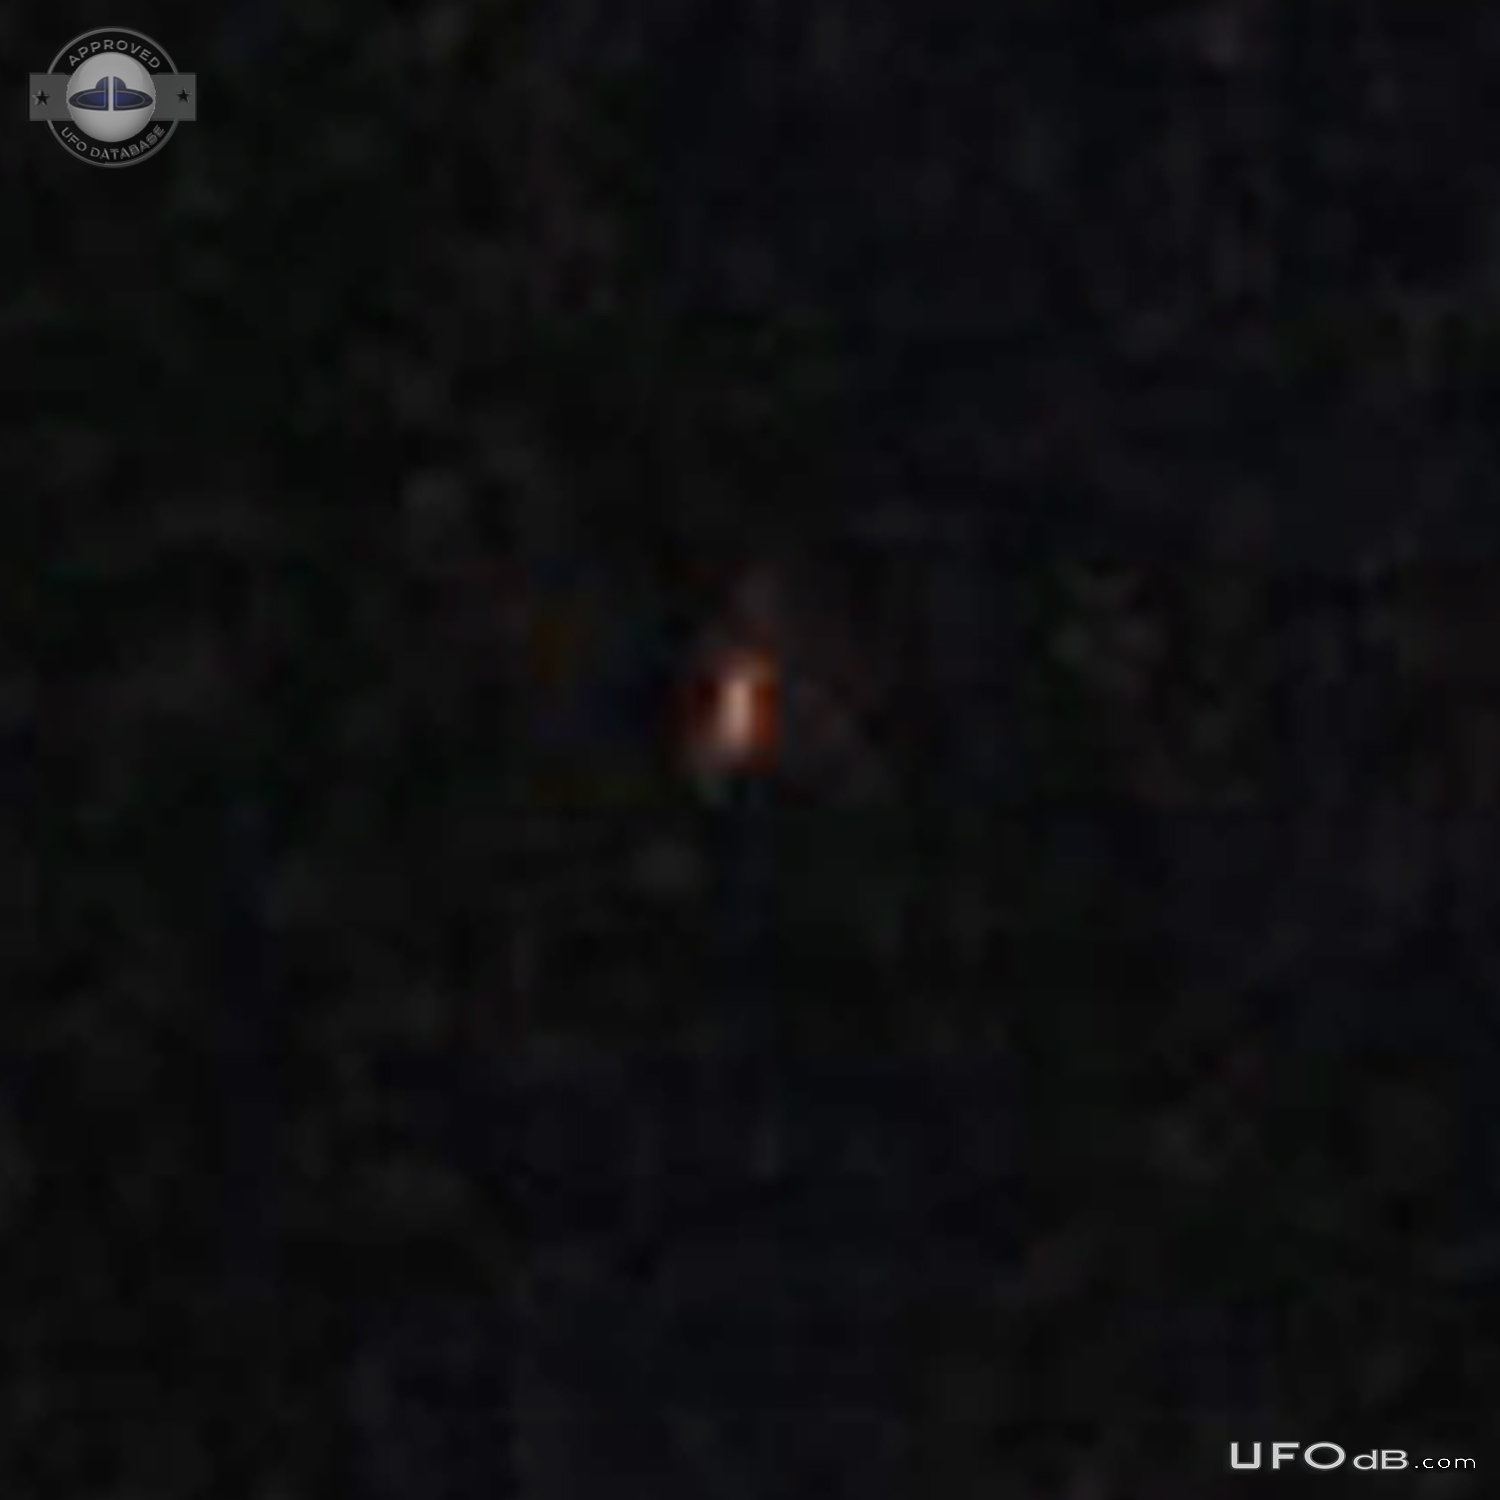 Saw a bright glowing orange UFO hover and move oddly in the night sky  UFO Picture #756-4